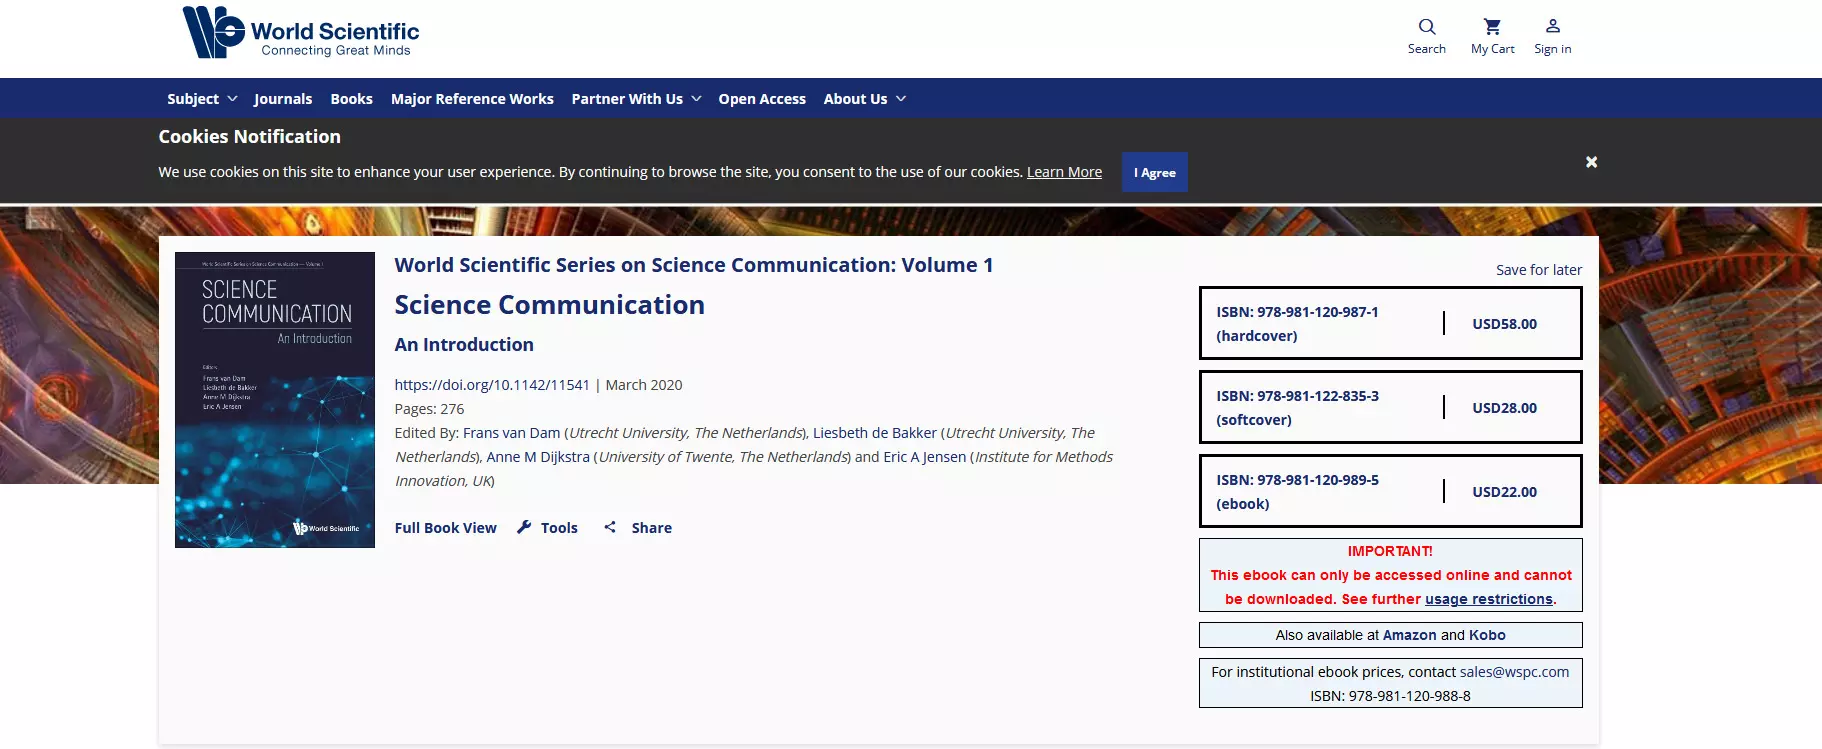 Request: Participant for a webinar on the use of textbook Science communication, an Introduction